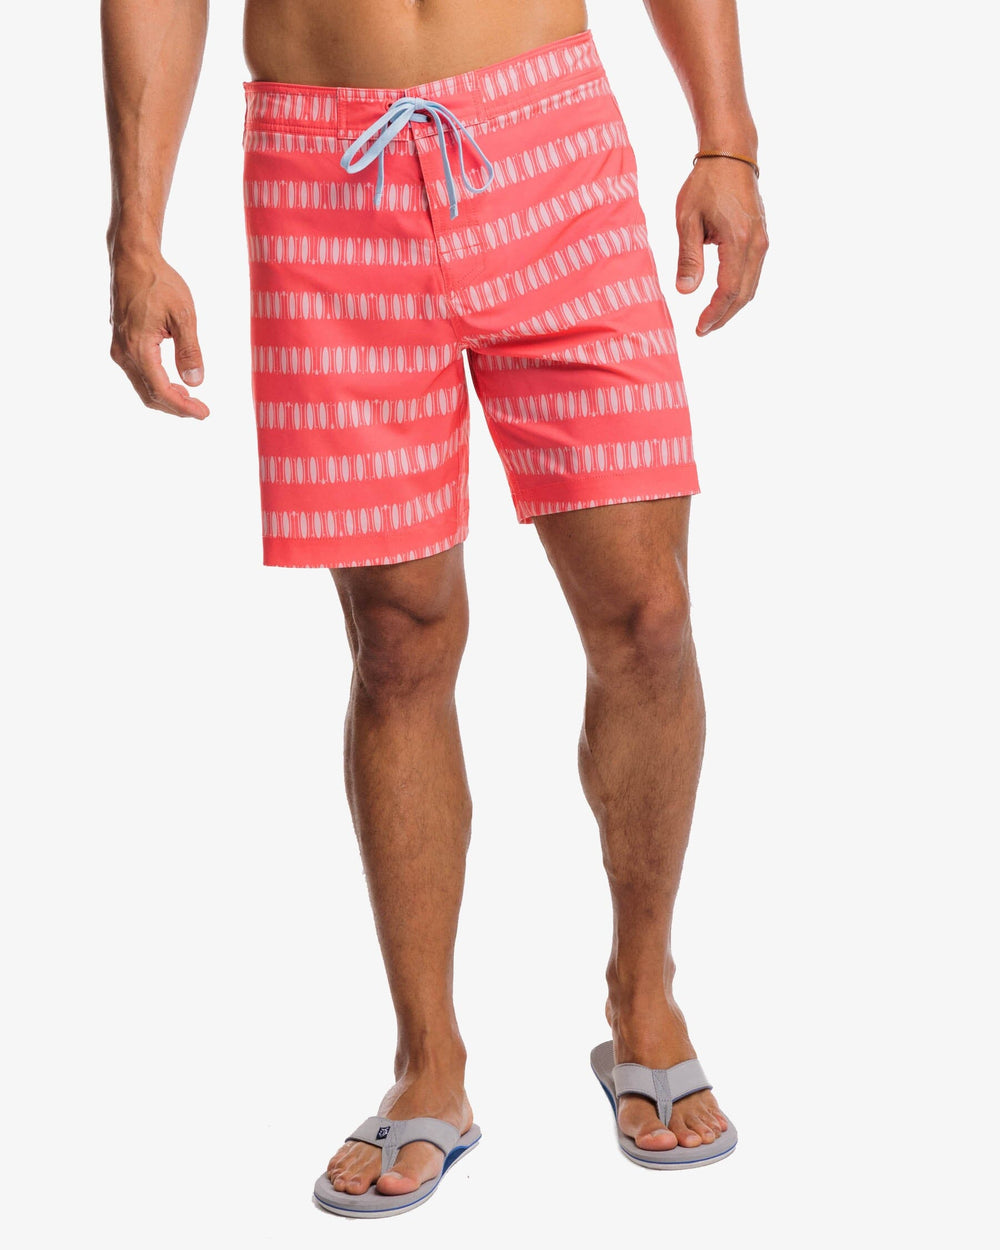 The front view of the Southern Tide Paddlin Out Printed Swim Short by Southern Tide - Sunkist Coral